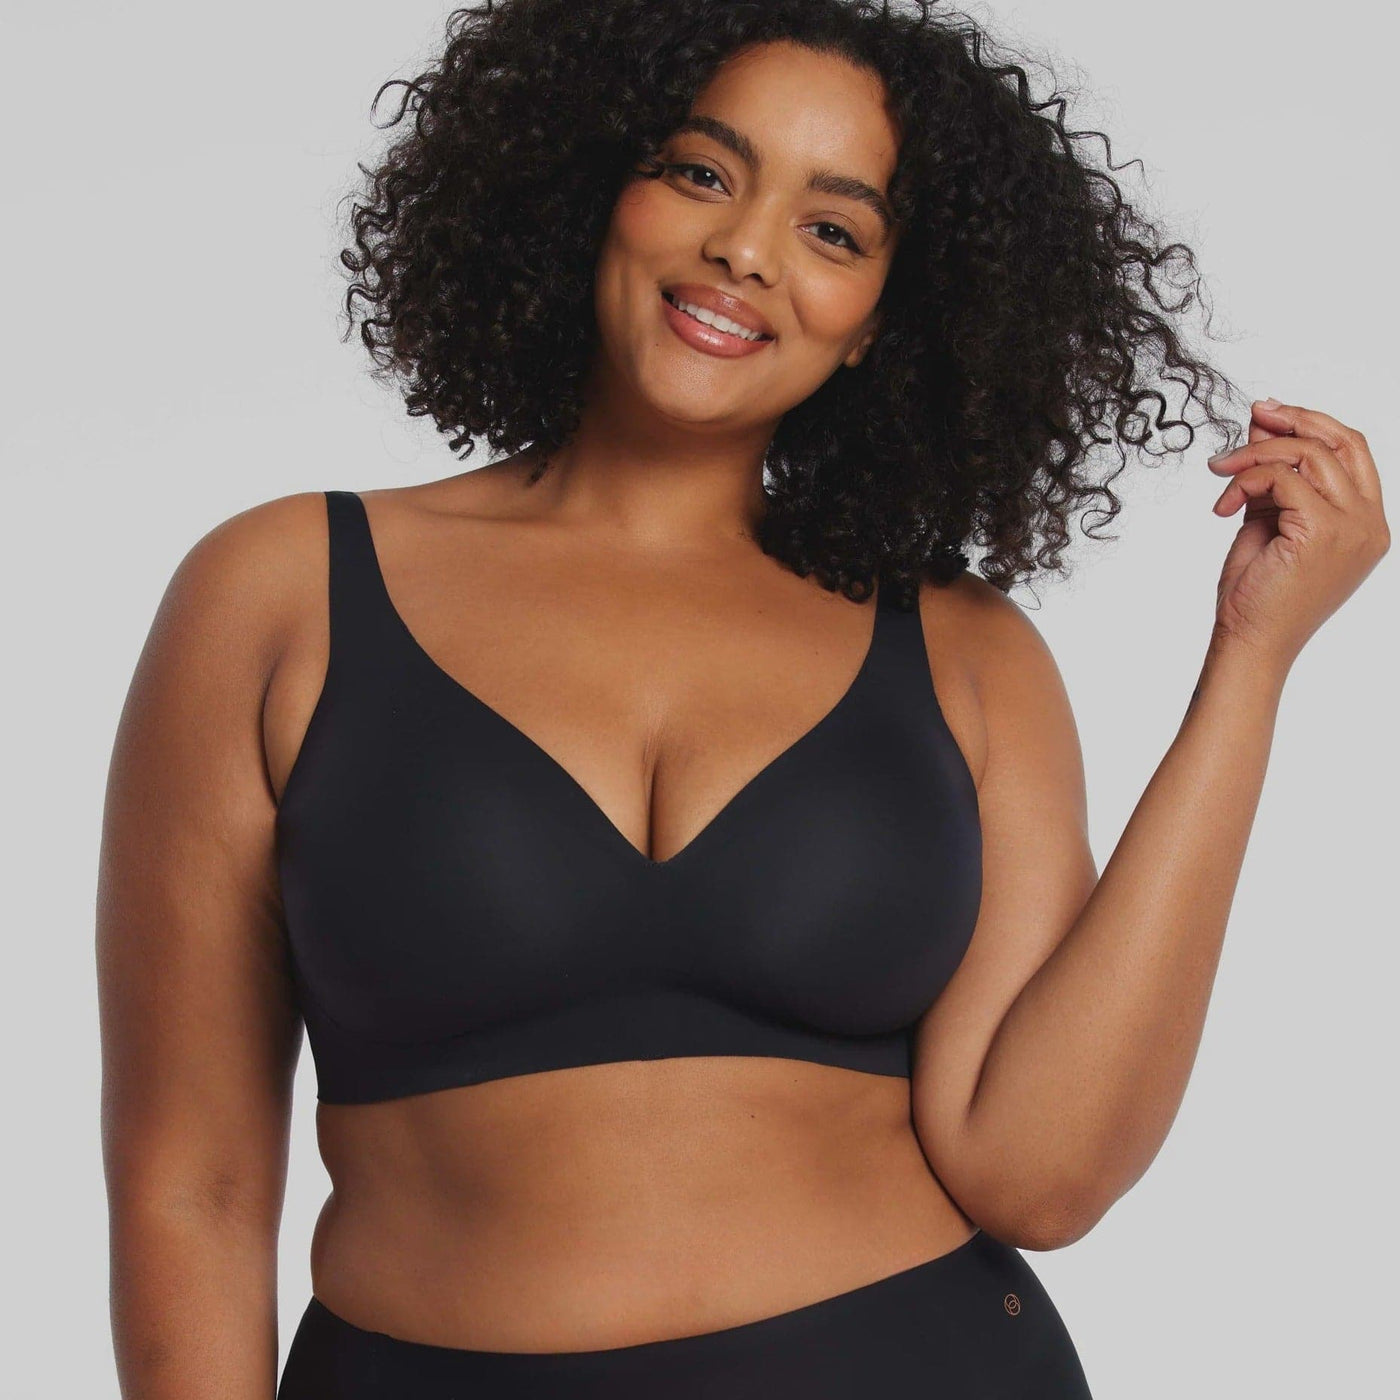 Evelyn & Bobbie Starlette Plunge Bra in Black-Non-Wired Bras-Evelyn & Bobbie-Black-Small-Anna Bella Fine Lingerie, Reveal Your Most Gorgeous Self!